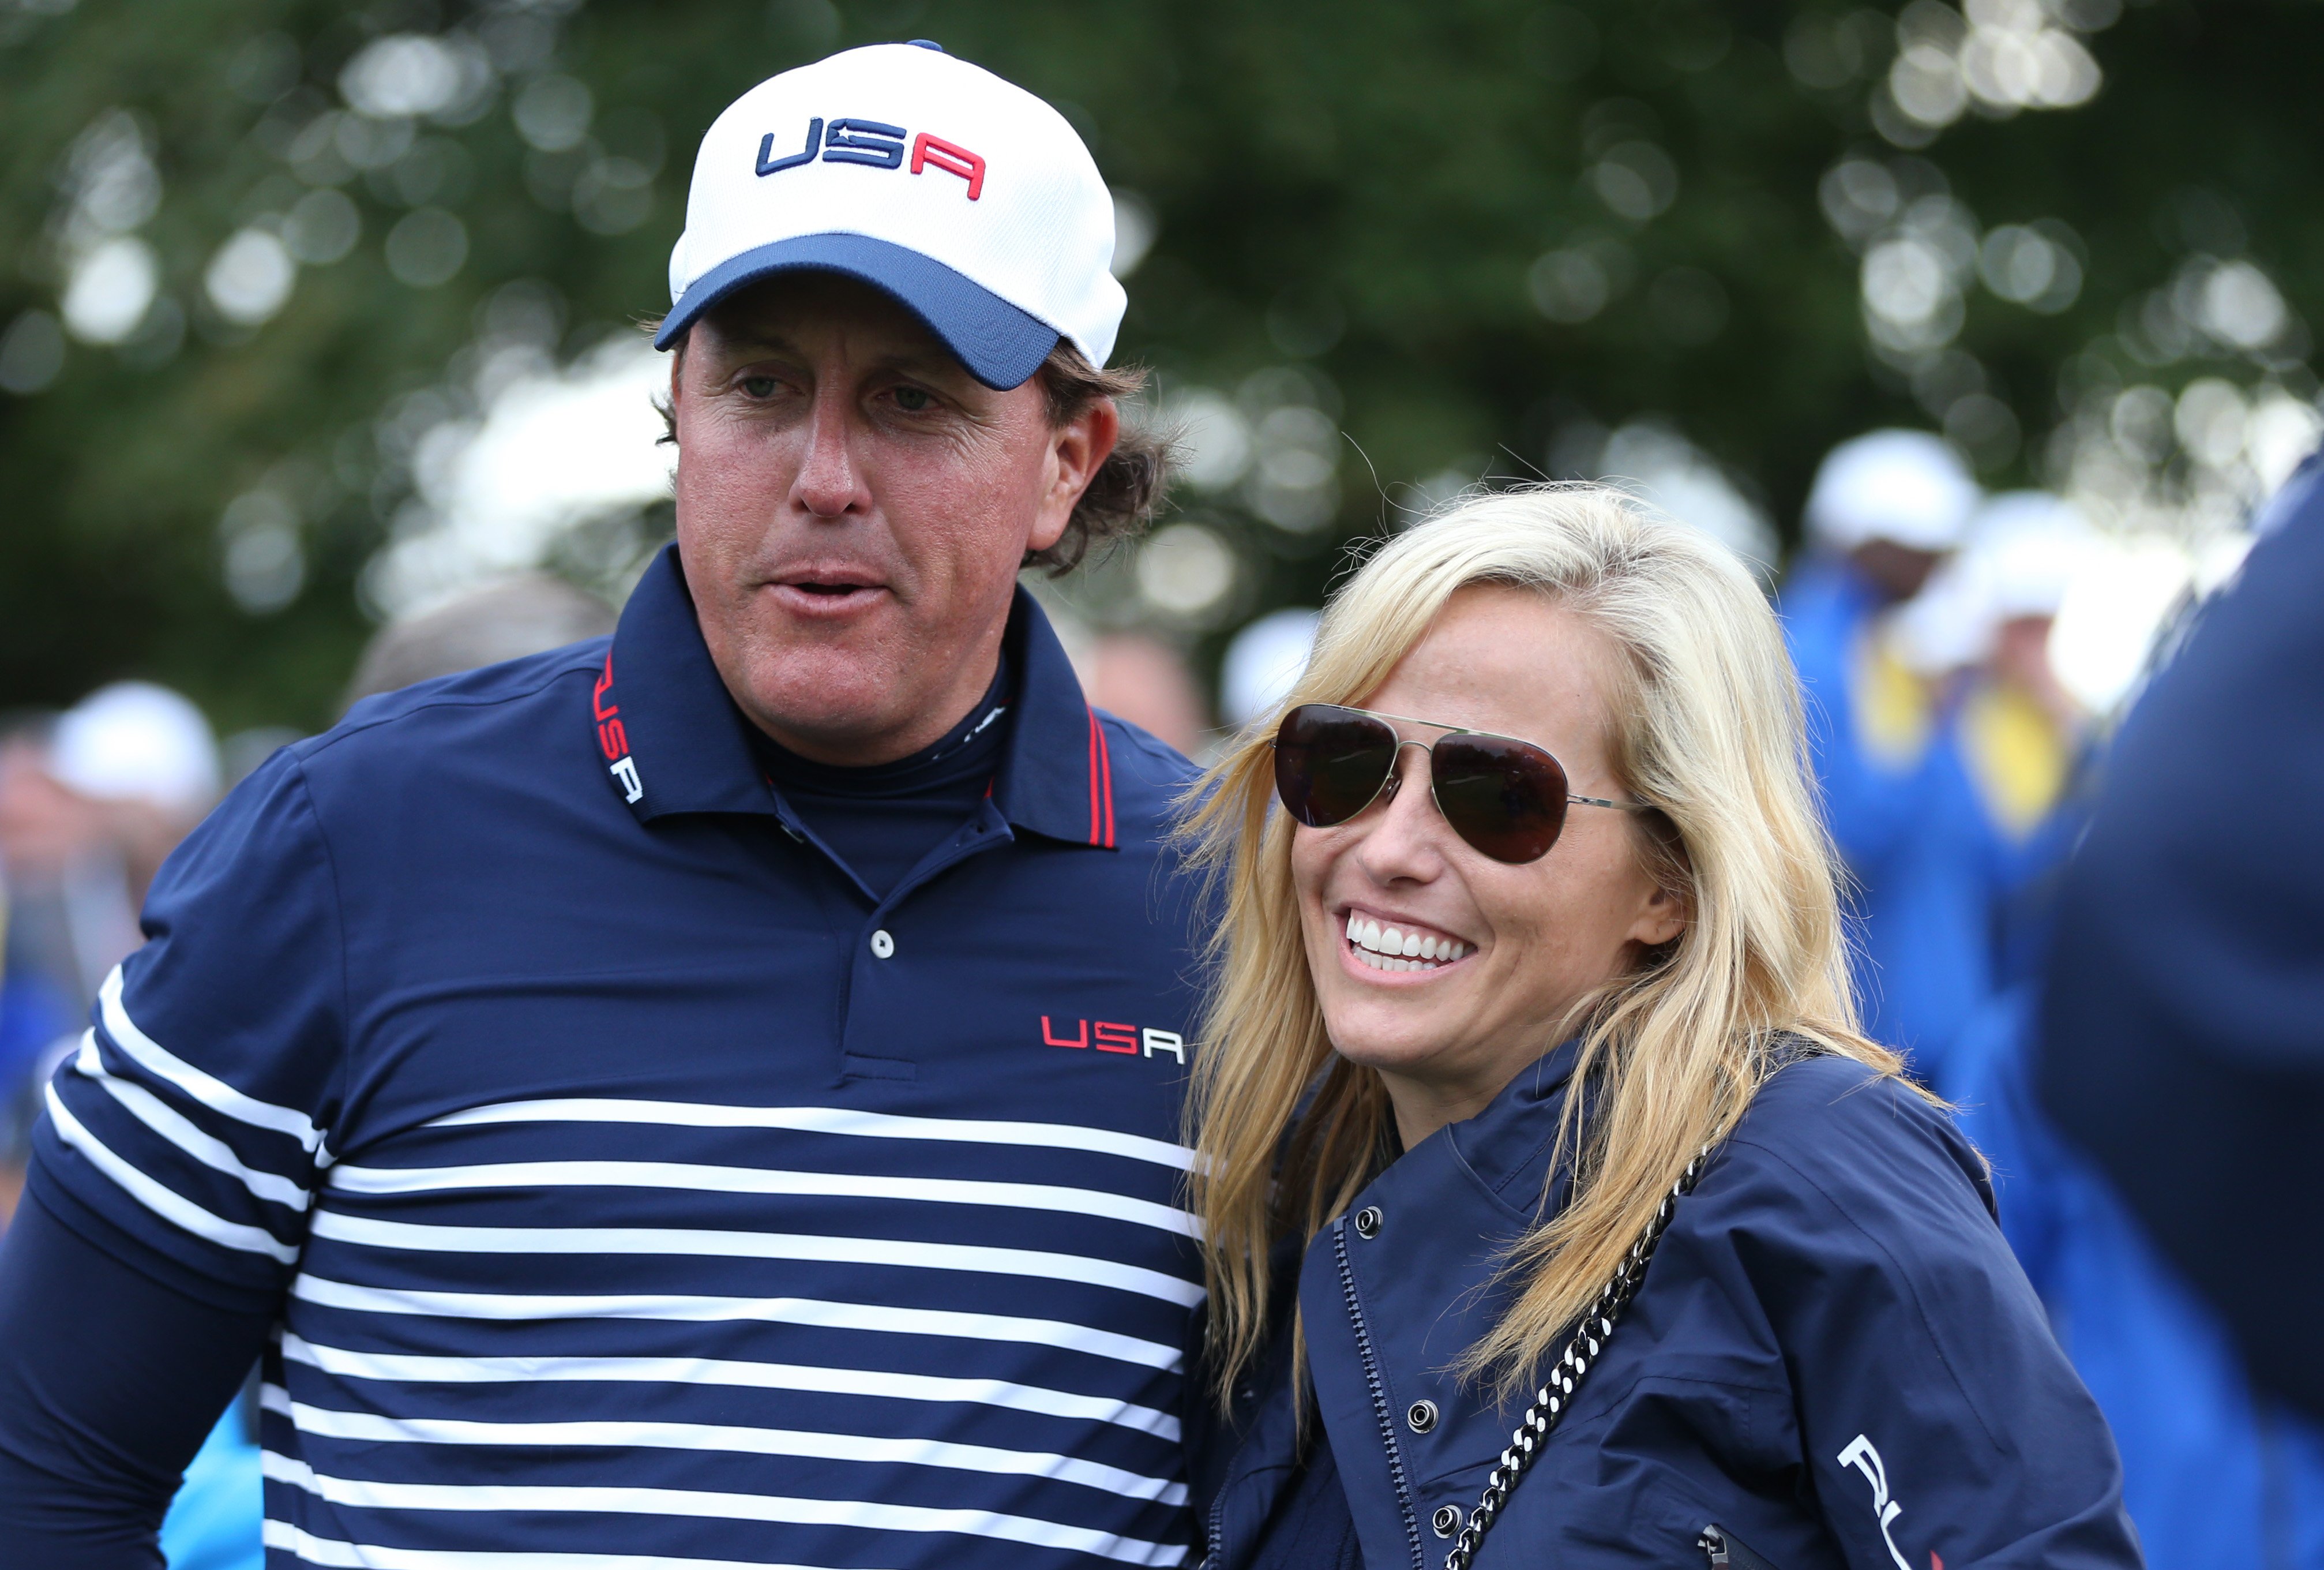 Phil and Amy Mickelson at the 2014 Ryder Cup on September 28, 2014, in Auchterarder, Scotland. | Source: Getty Images